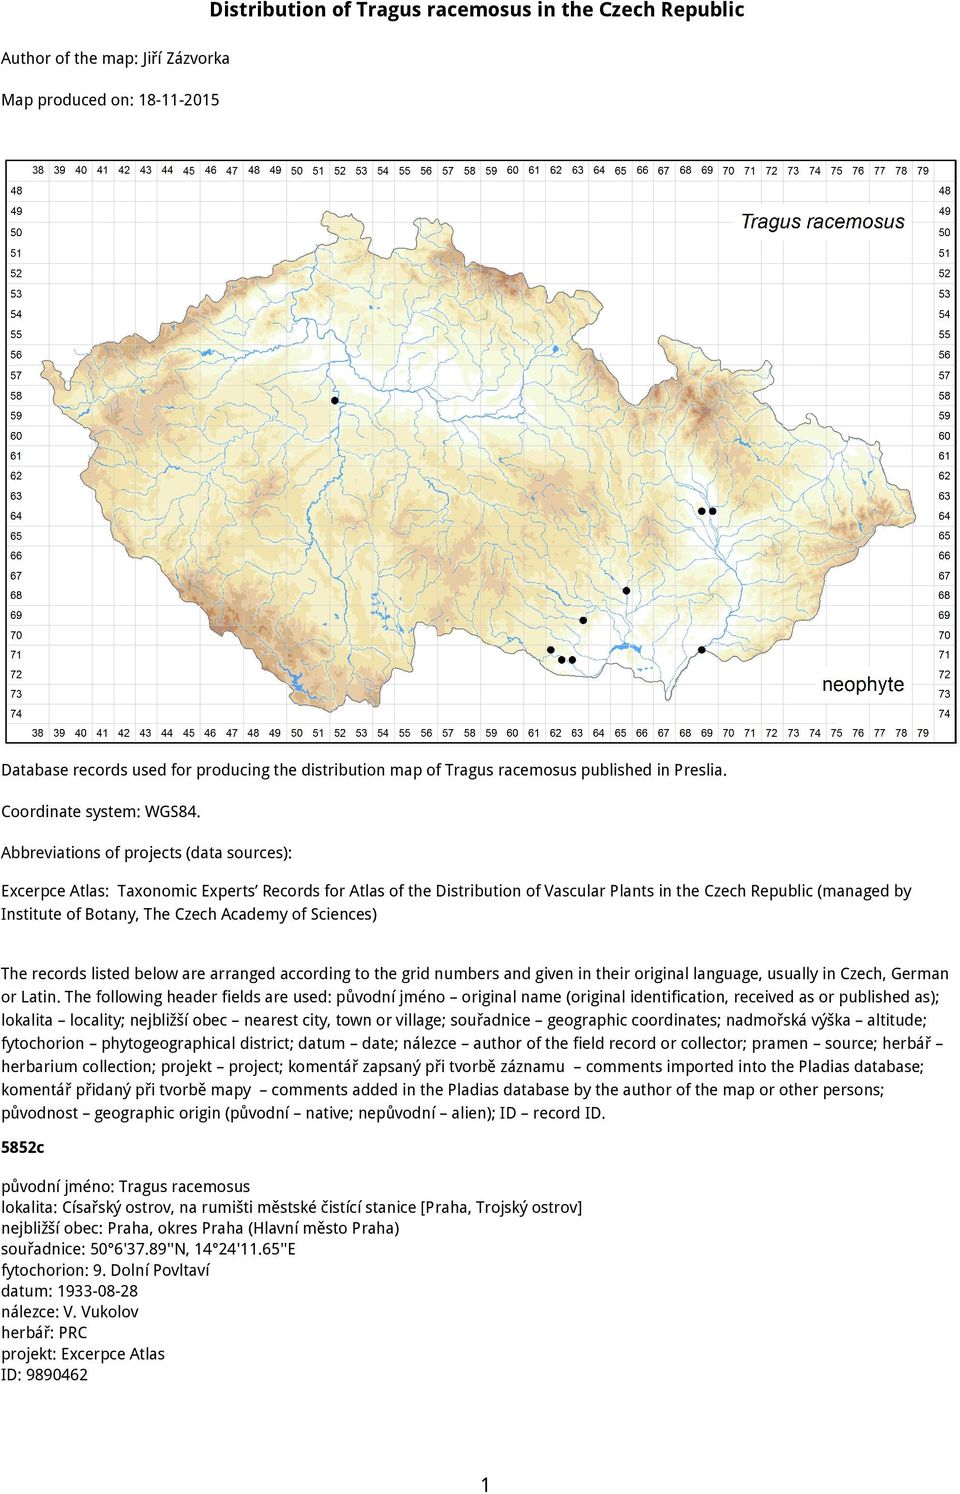 Abbreviations of projects (data sources): Excerpce Atlas: Taxonomic Experts Records for Atlas of the Distribution of Vascular Plants in the Czech Republic (managed by Institute of Botany, The Czech